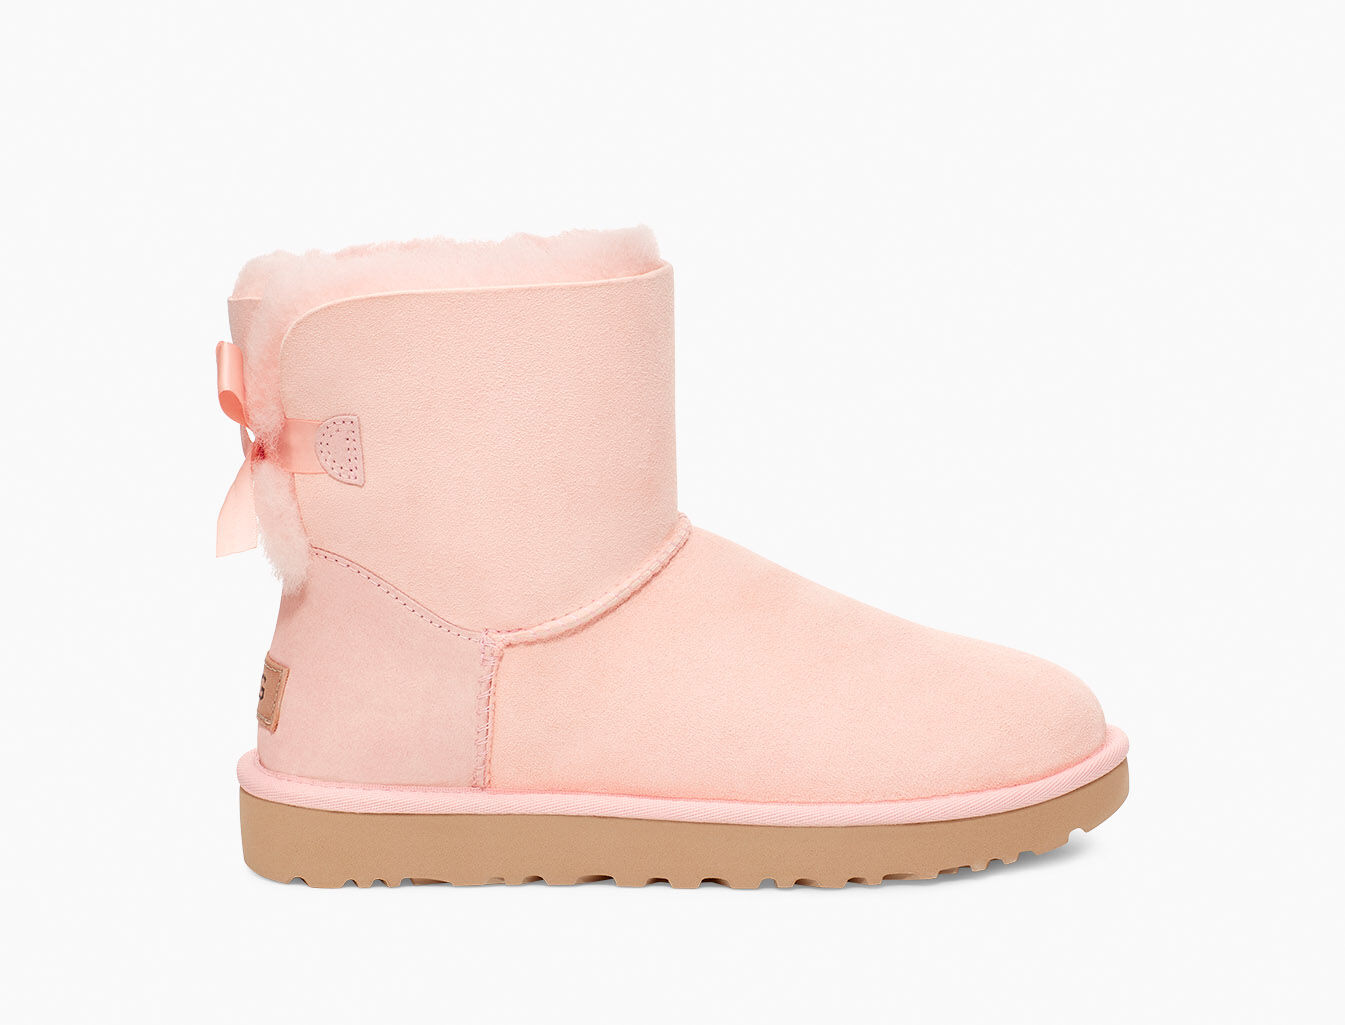 best price for ugg boots